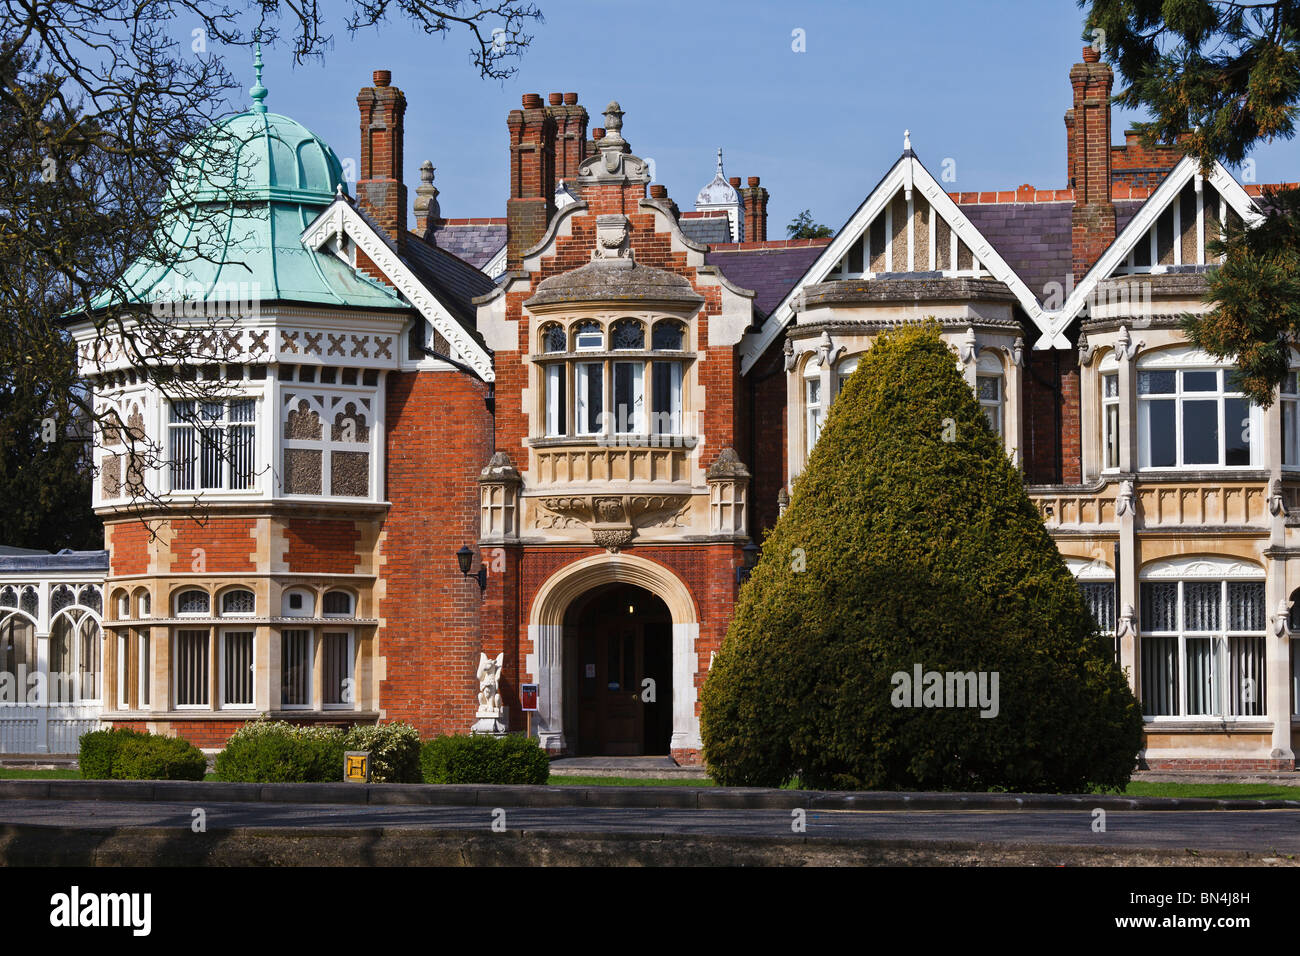 Bletchley Park in Milton Keynes, home of the World War II code breakers. Stock Photo